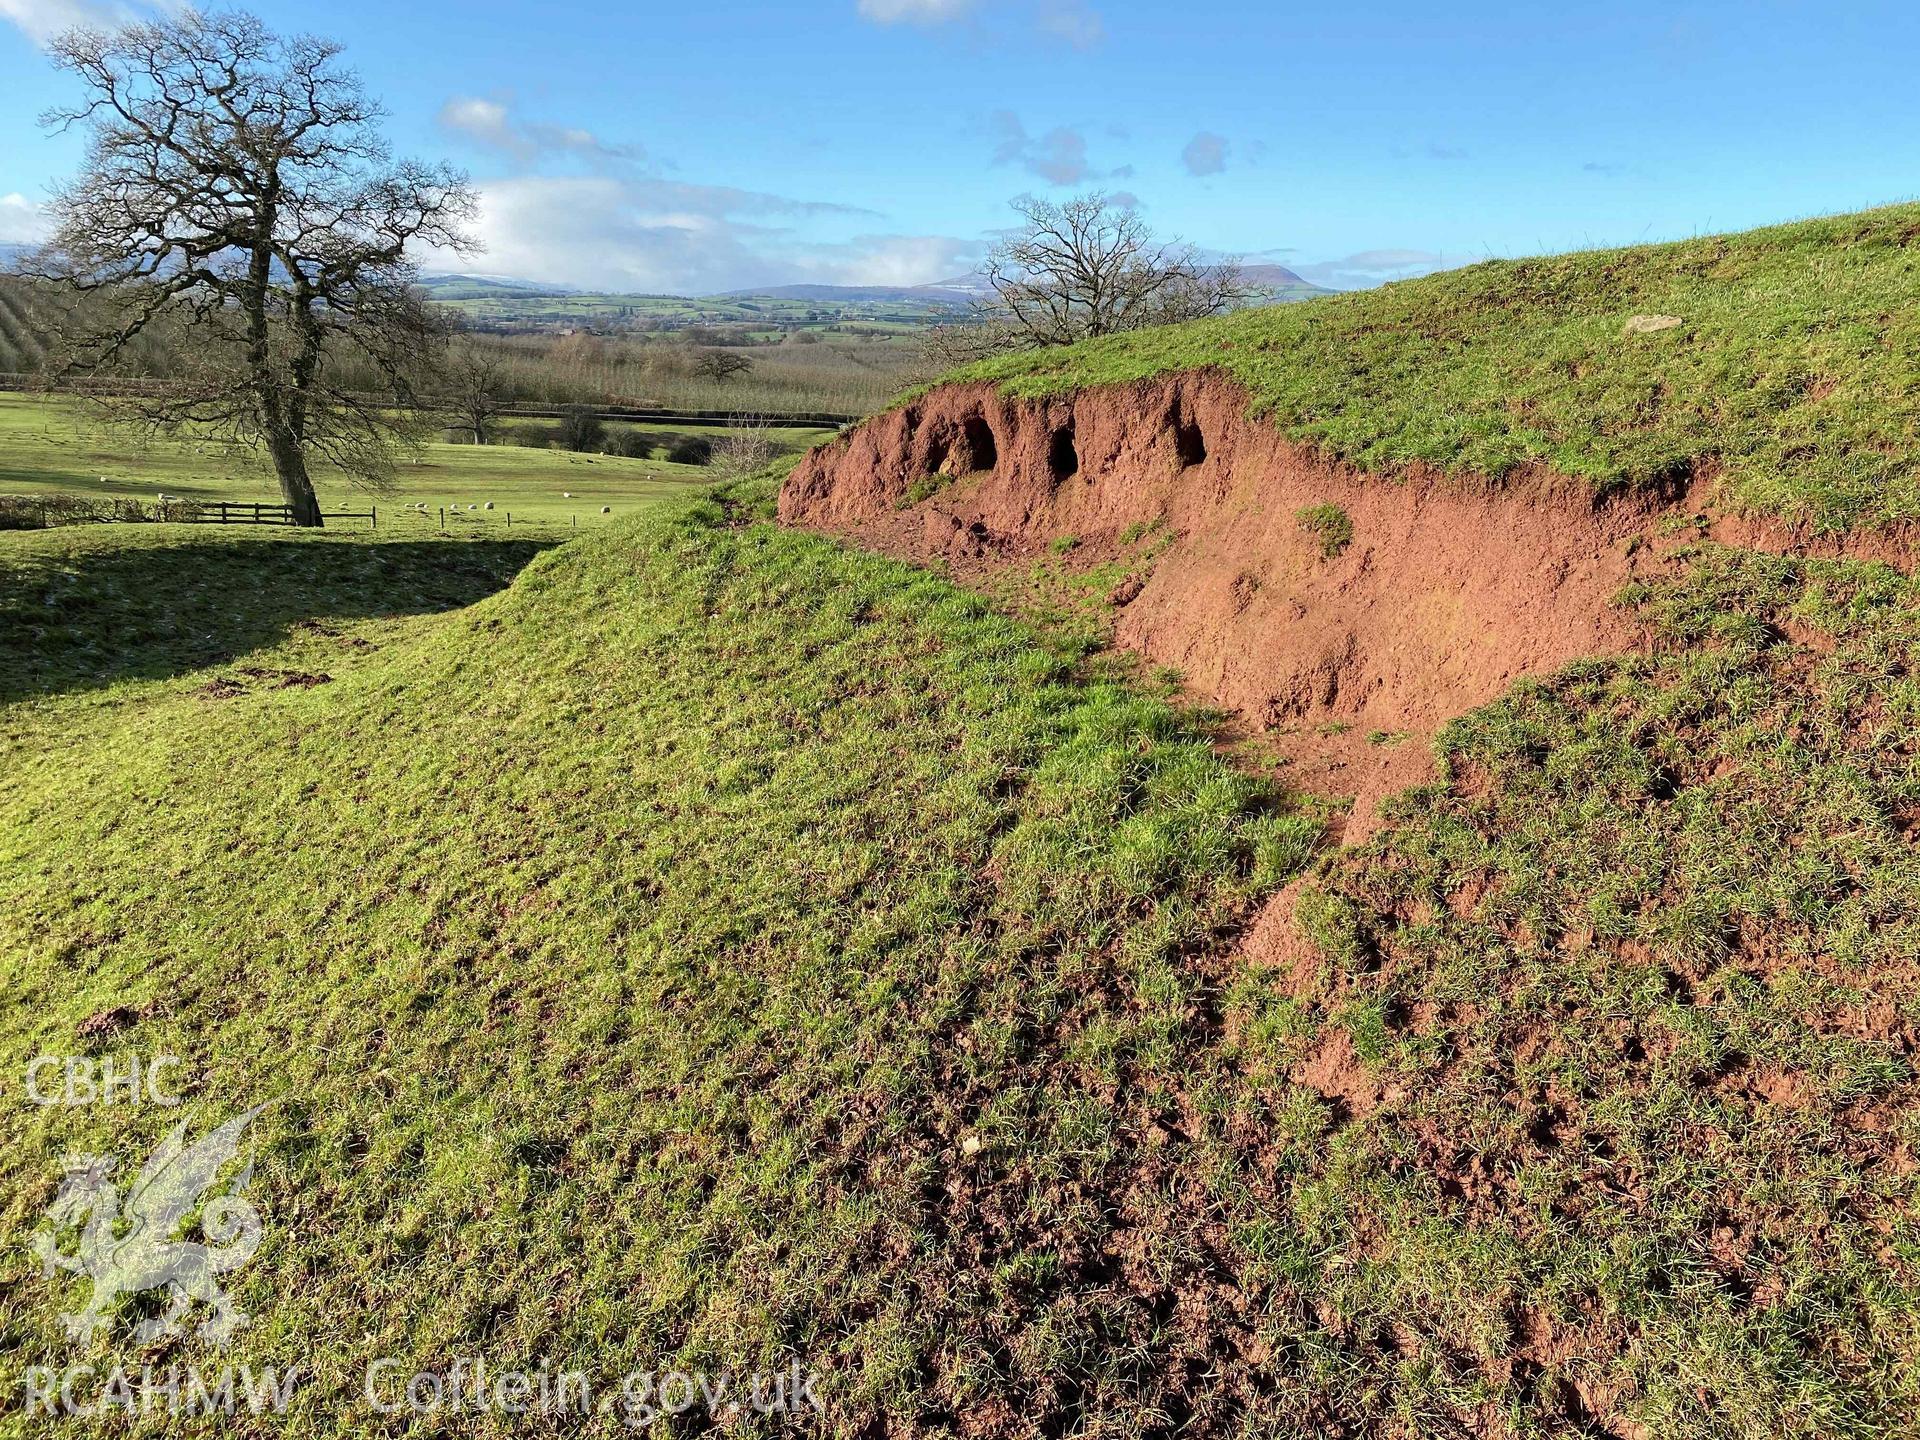 Digital photograph of erosion at Penrhos motte and bailey castle, produced by Paul Davis in 2020